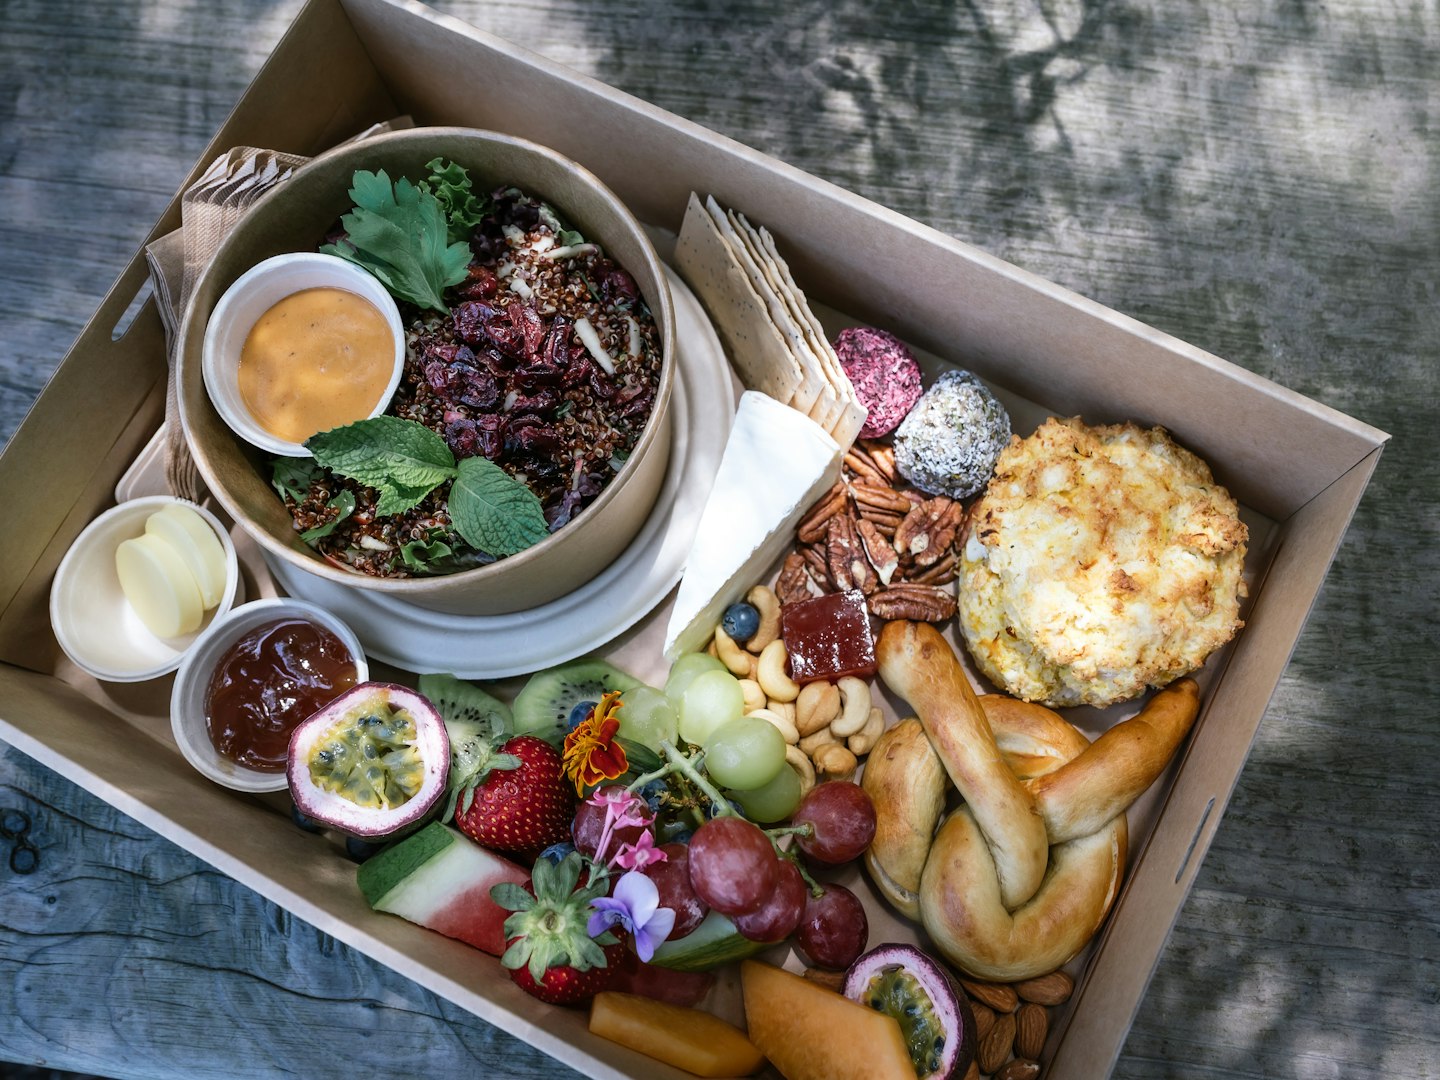 picnic hamper in cardboard box with salad, pastries, fruit, cheese and condiments